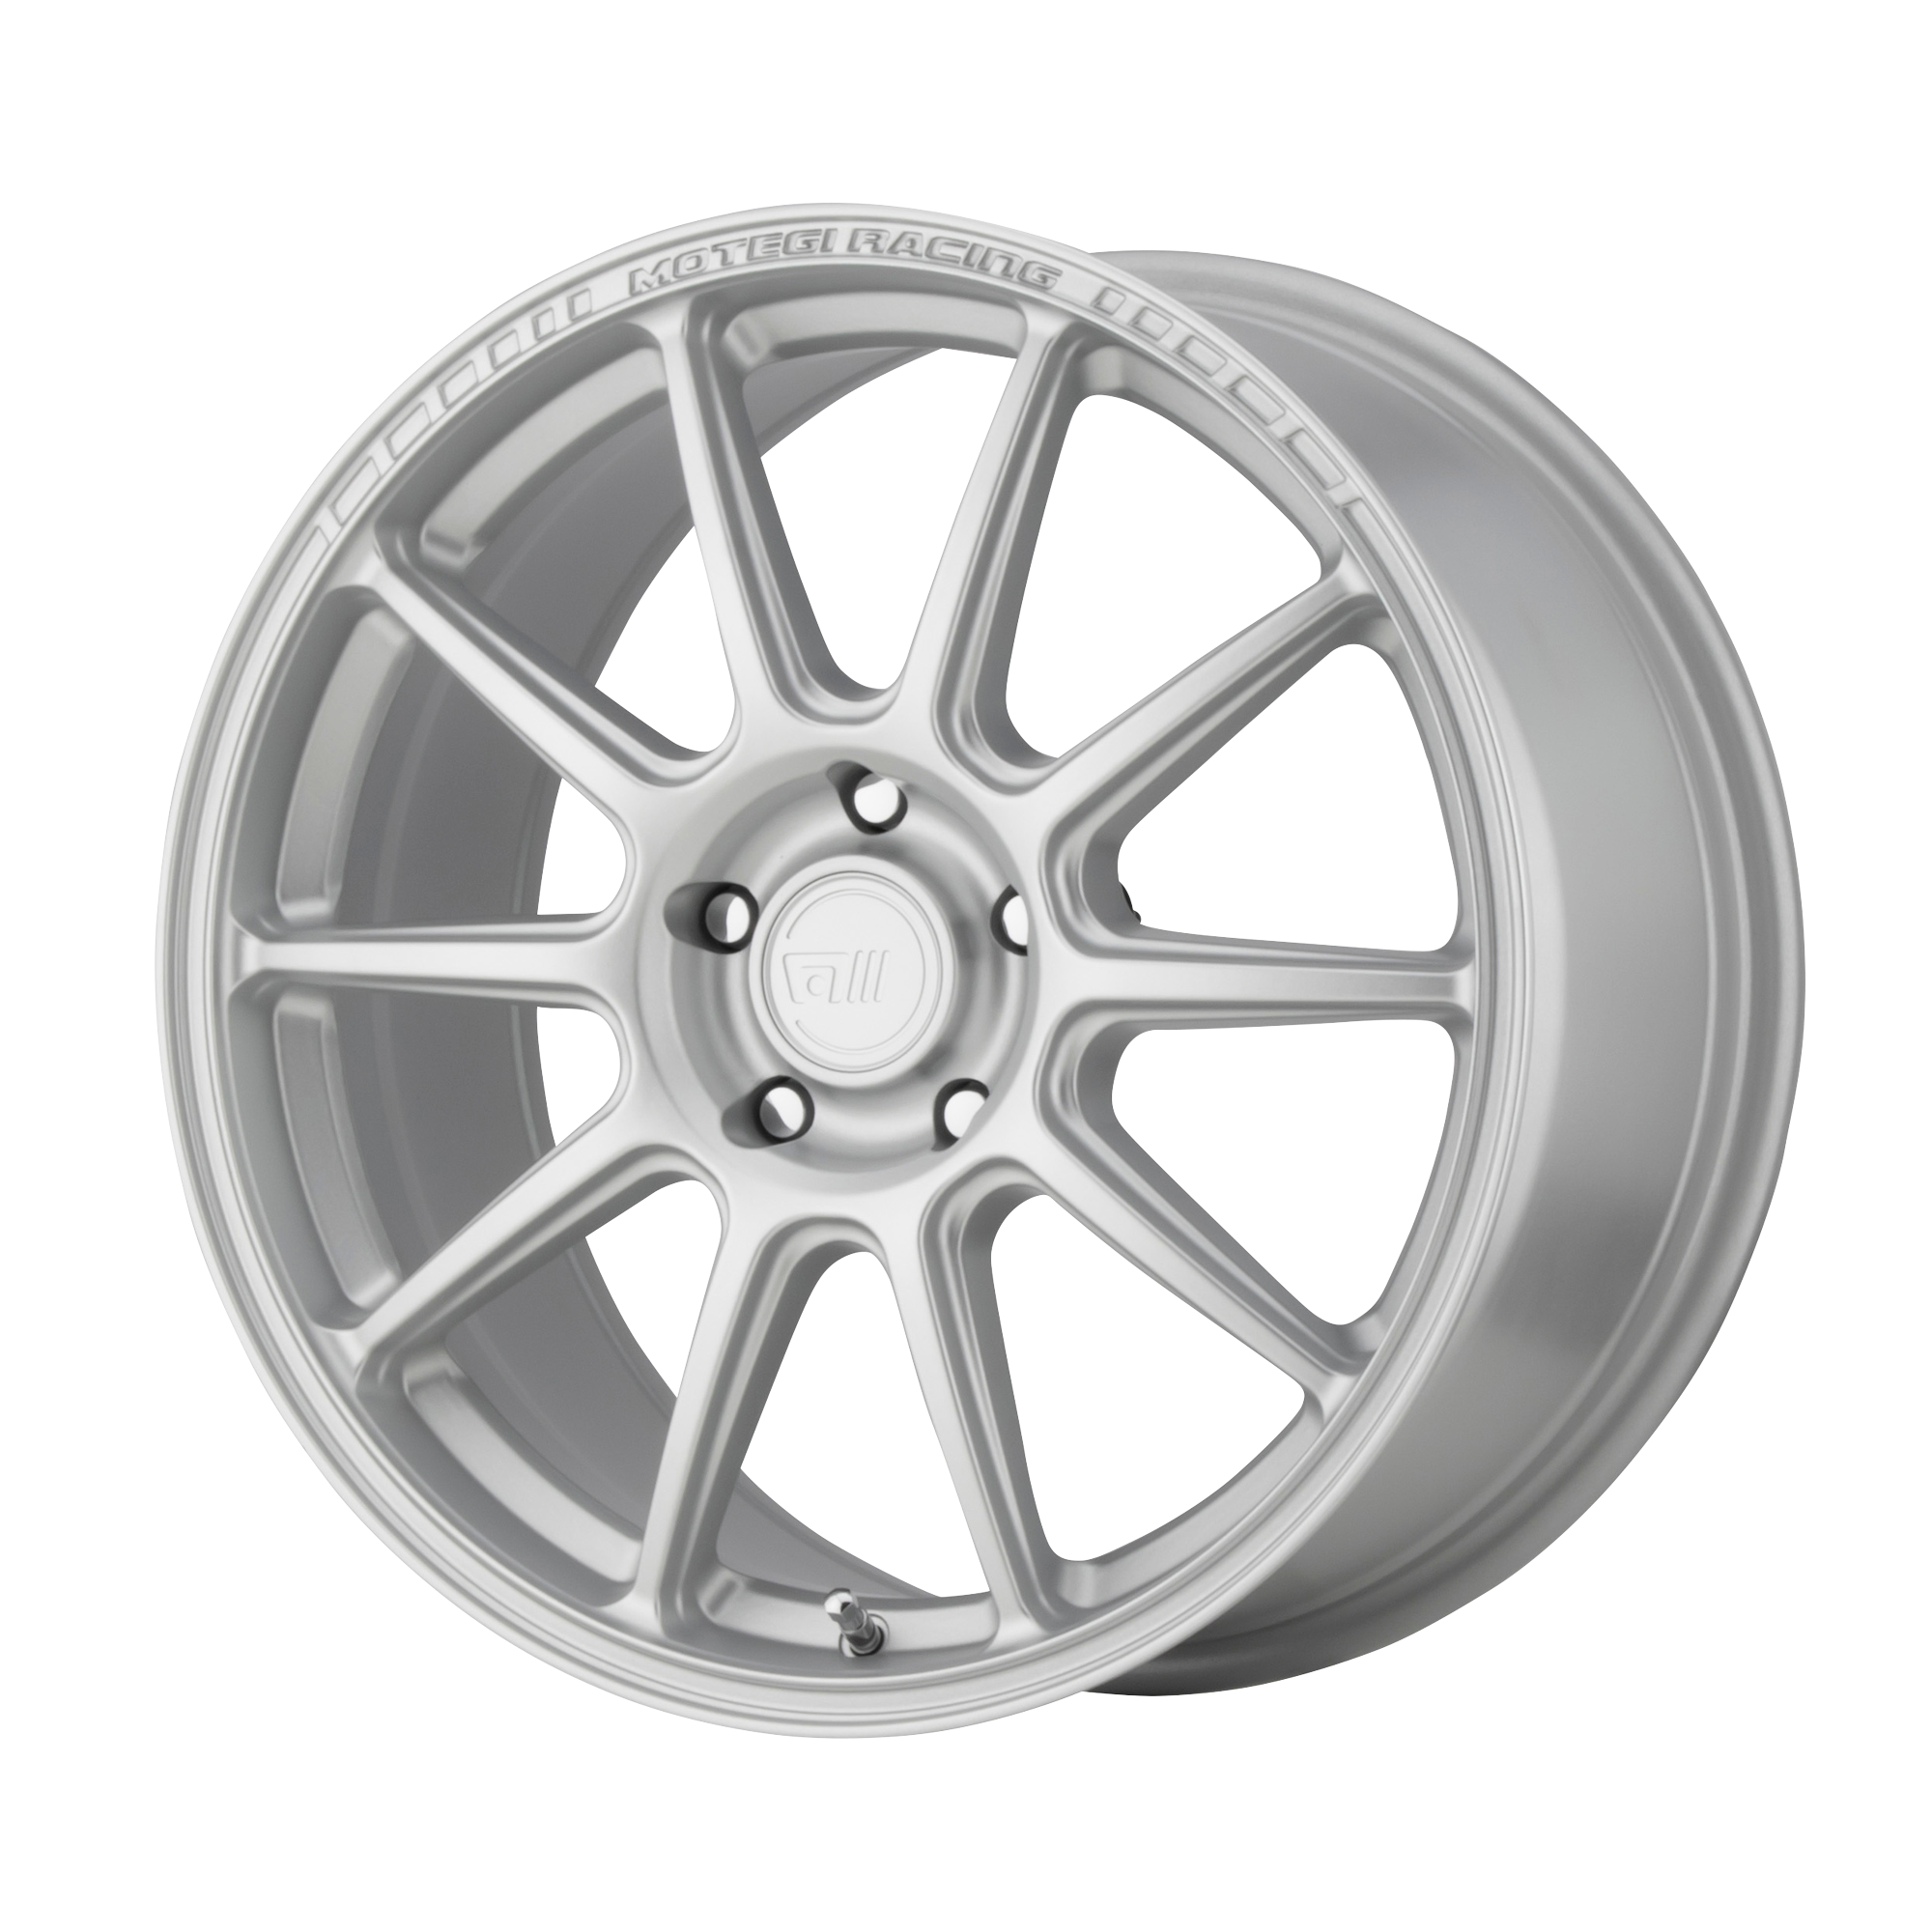 MR140 18x8.5 5x114.30 HYPER SILVER (35 mm) - Tires and Engine Performance